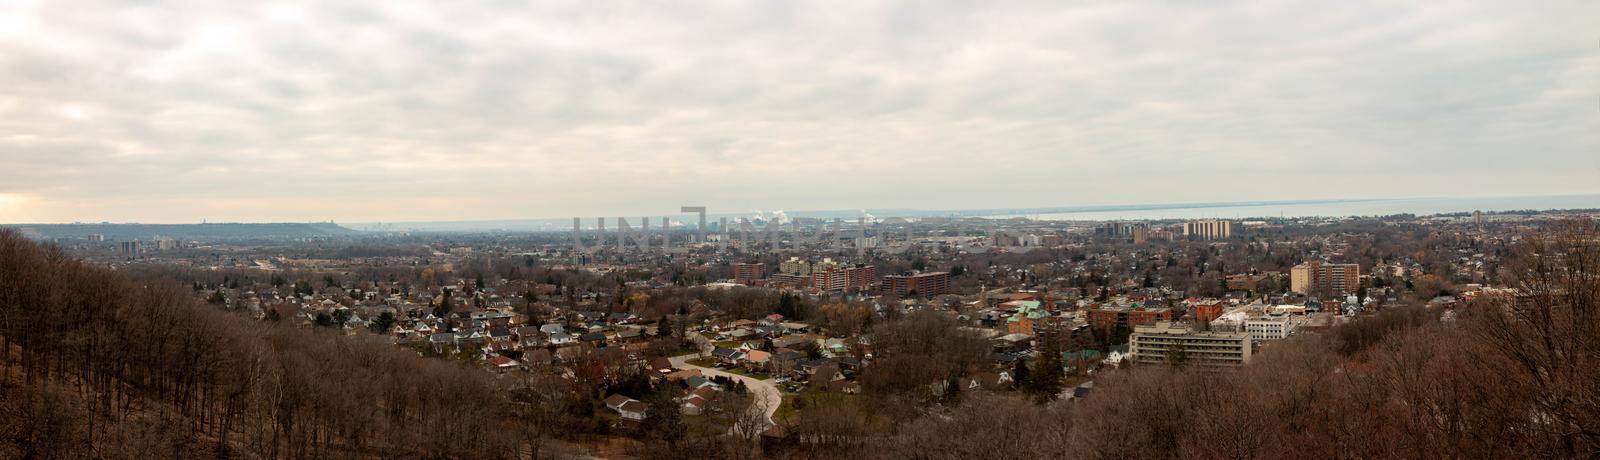 Hamilton Ontario skyline from the devils punch bowl. Panoramic format by mynewturtle1